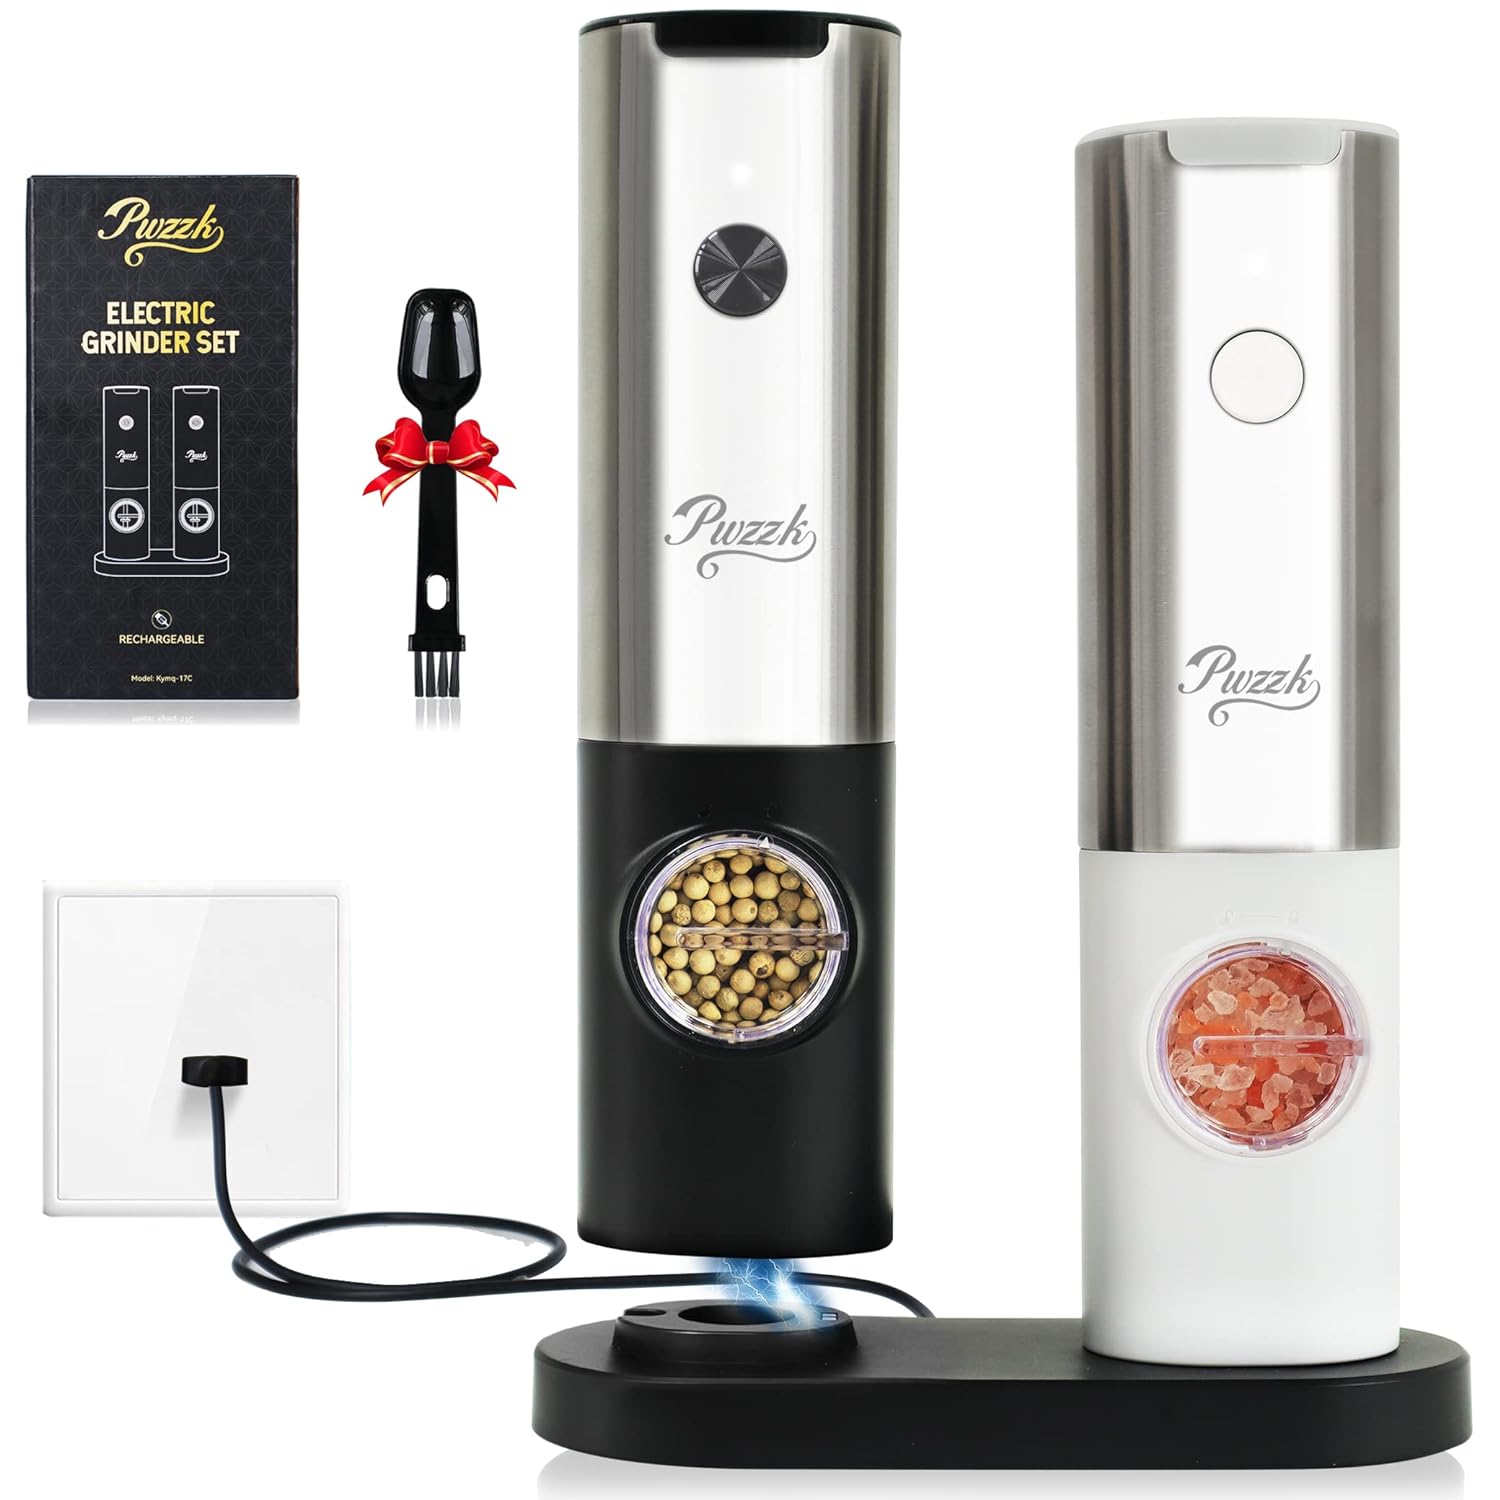 PwZzk Electric Salt and Pepper Grinder Set Rechargeable USB Type-C Charge Port One Hand Automatic Operation Stainless Steel Electronic Spice Mill Shakers With 6 Level Adjustable Coarseness (2 Pack)